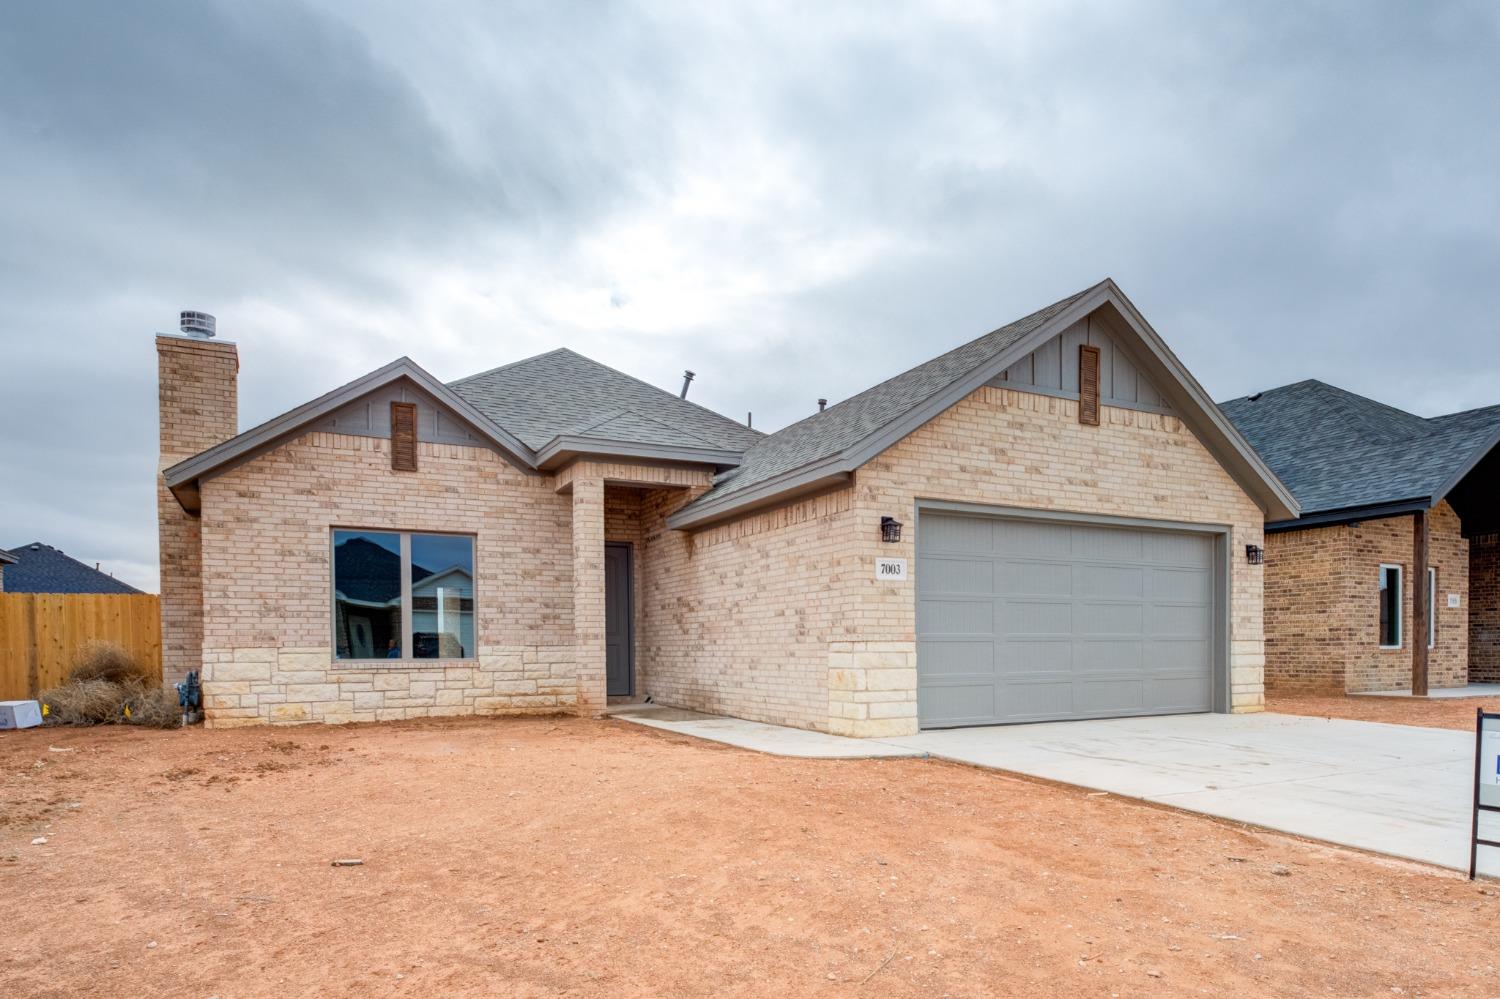 Builder is offering up to $10,000 flex cash!! Get ready to fall in love with this gorgeous new construction home in Burgamy Park! This 3 bedroom, 2 bathroom home features an open concept kitchen/living/dining room with vinyl plank flooring, quartz countertops, and stained wood accents. The isolated master features a separate shower and soaking tub, double vanities, and a large closet full of storage. The covered patio and soon to be installed sprinkler and hydro mulch make this the perfect home for your family!